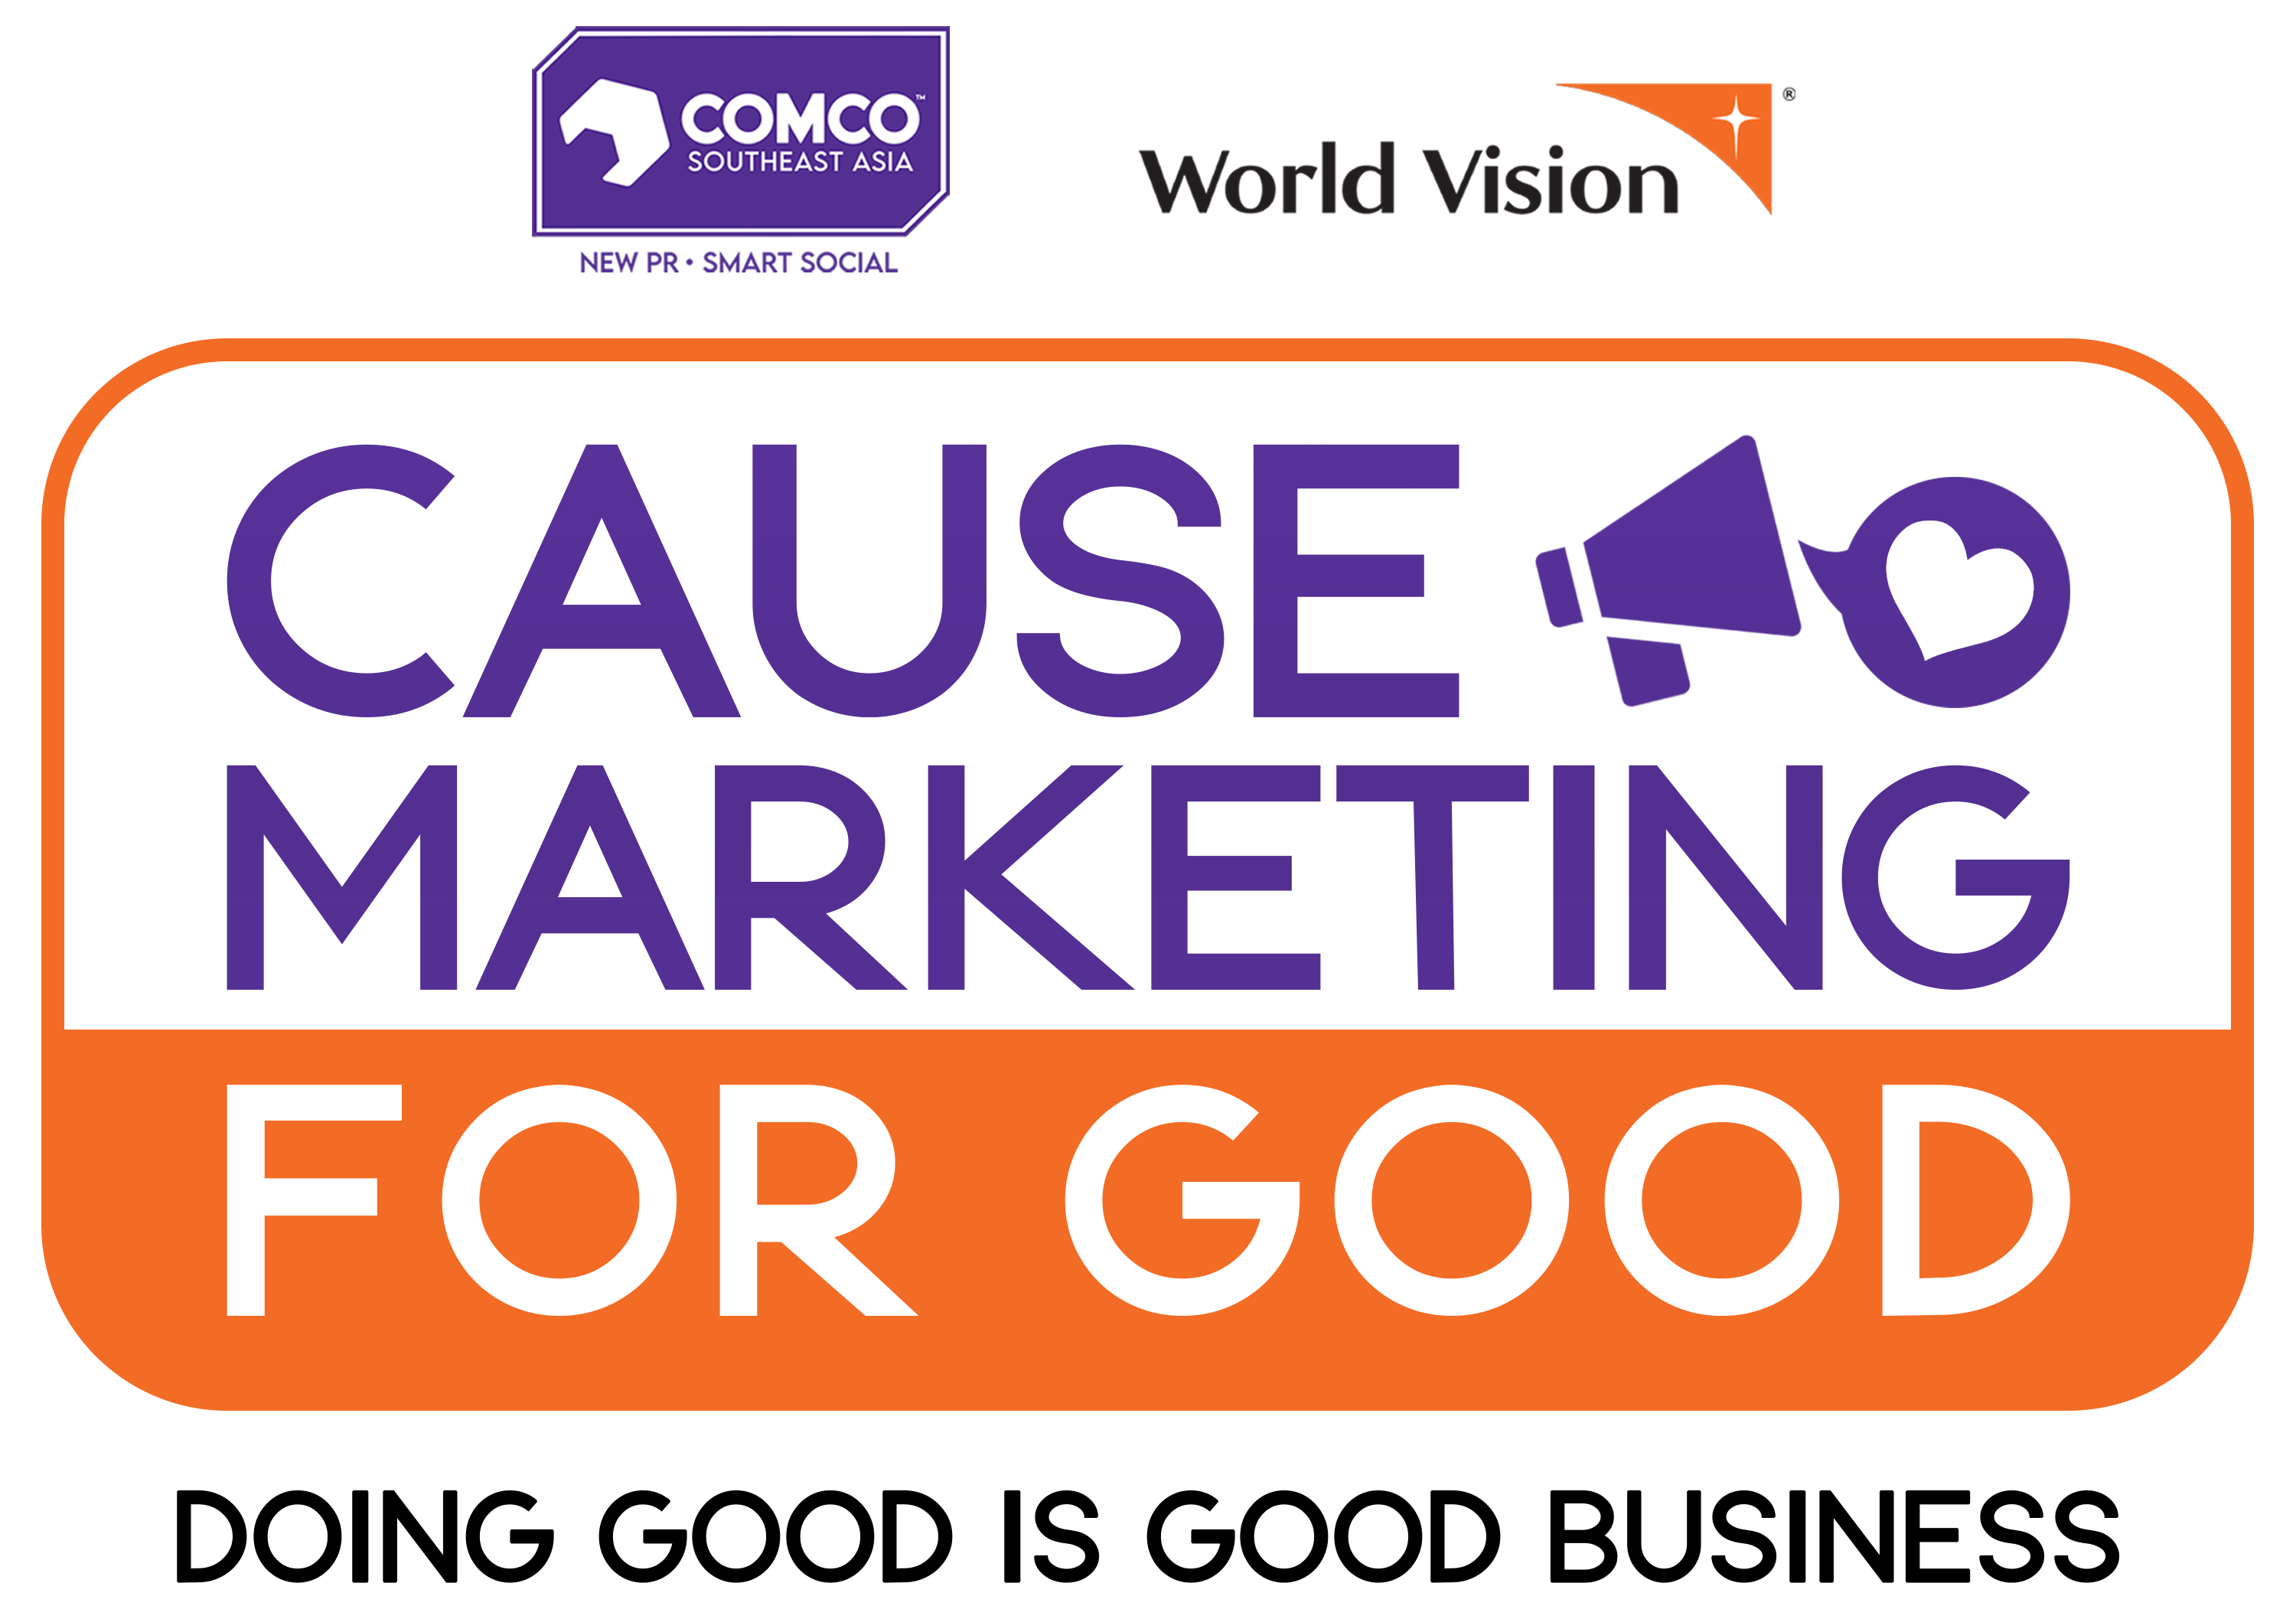 World Vision ComCo Southeast Asia - Cause Marketing for Good Logo